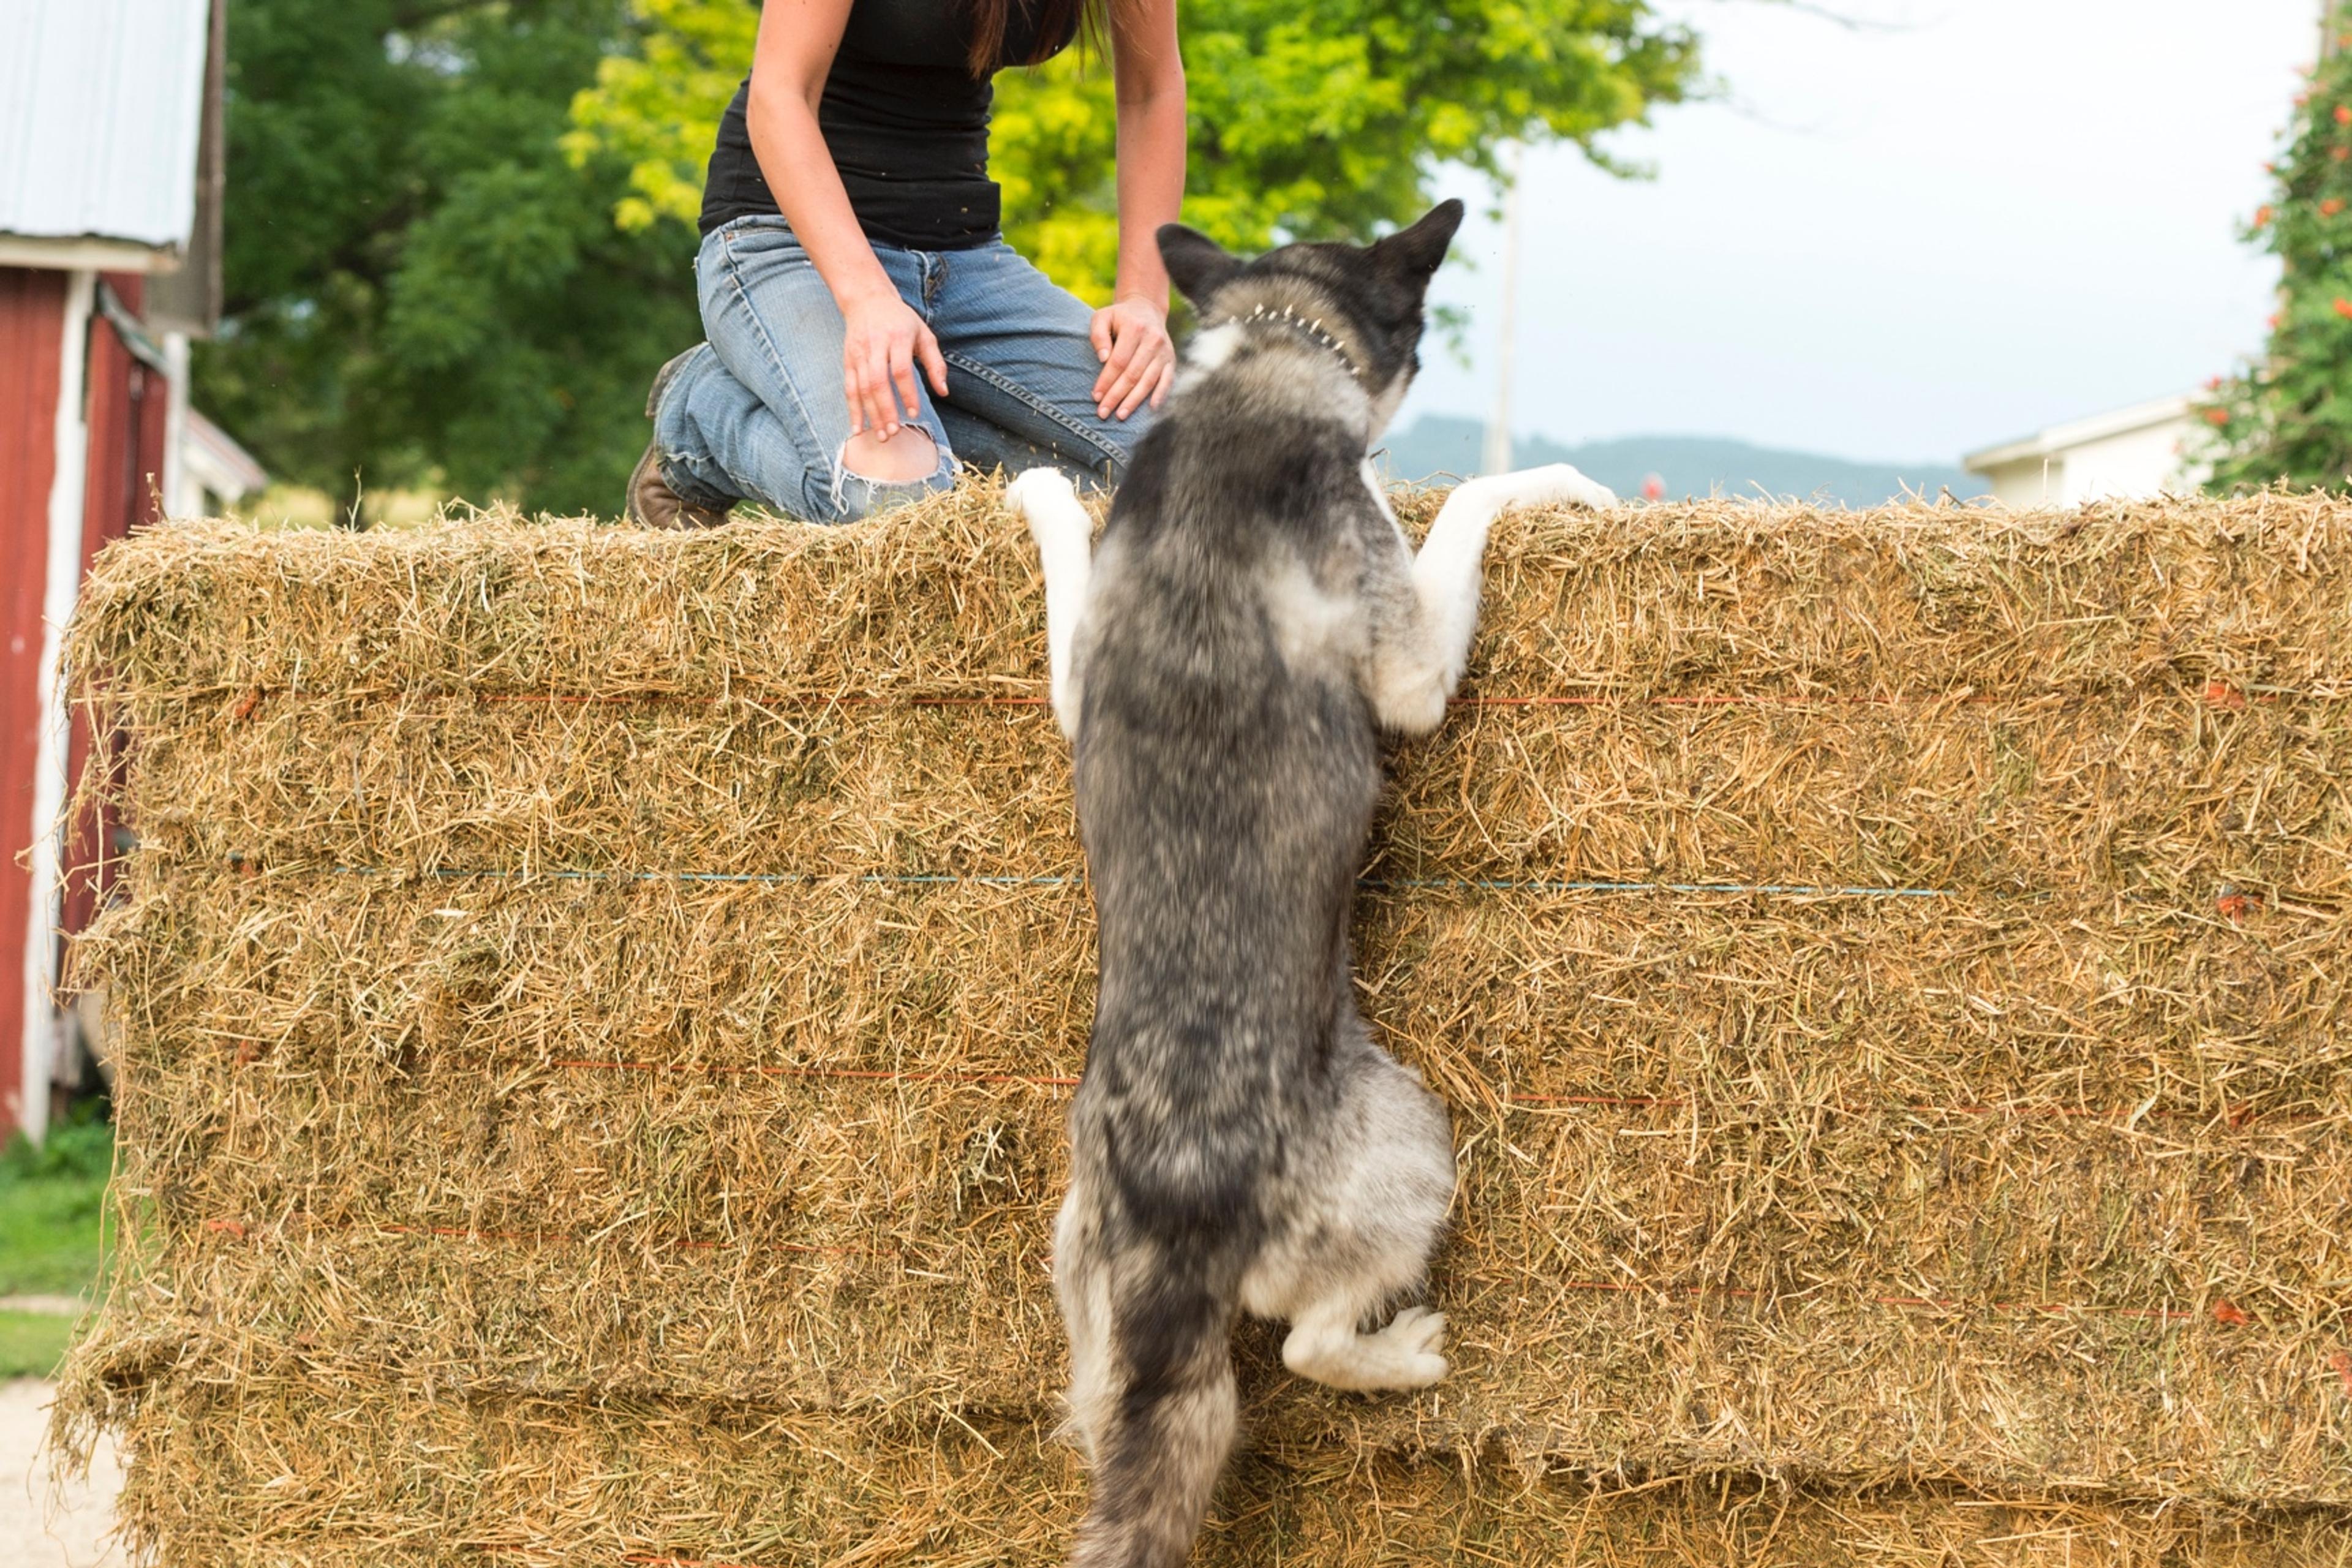 A dog climbs a hay bale to be with the woman kneeling on top.